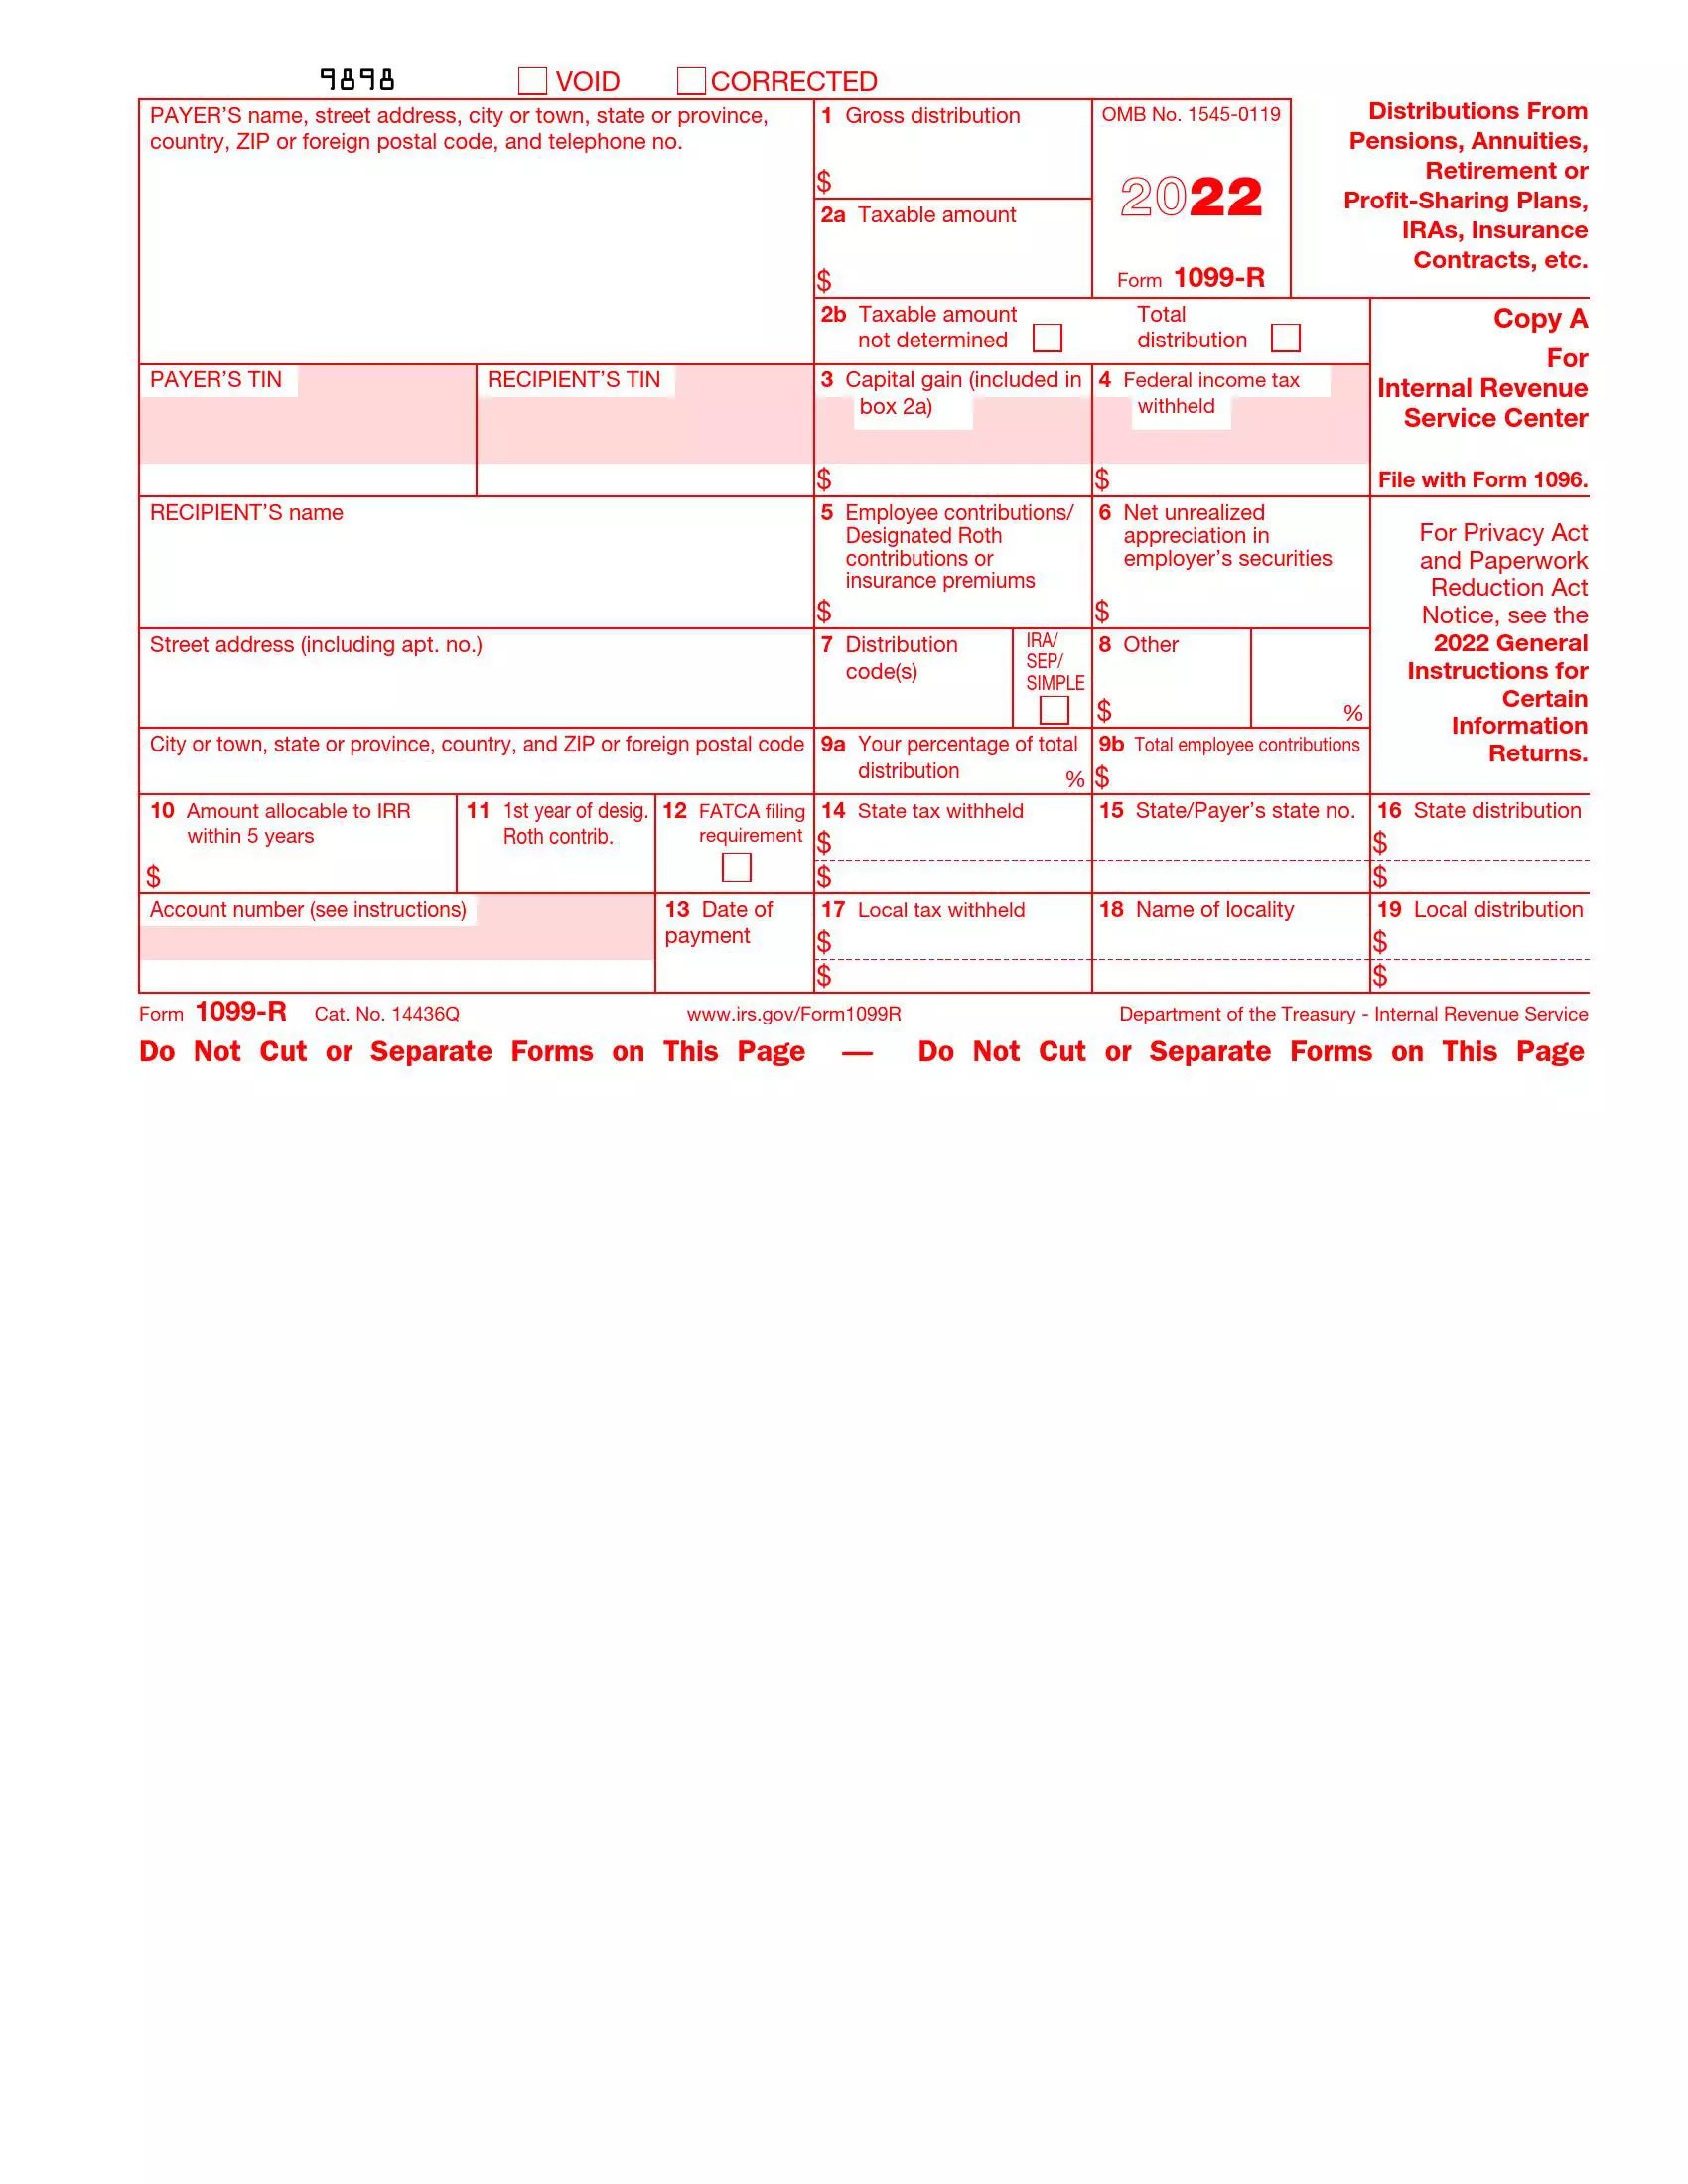 irs form 1099-r 2022 preview